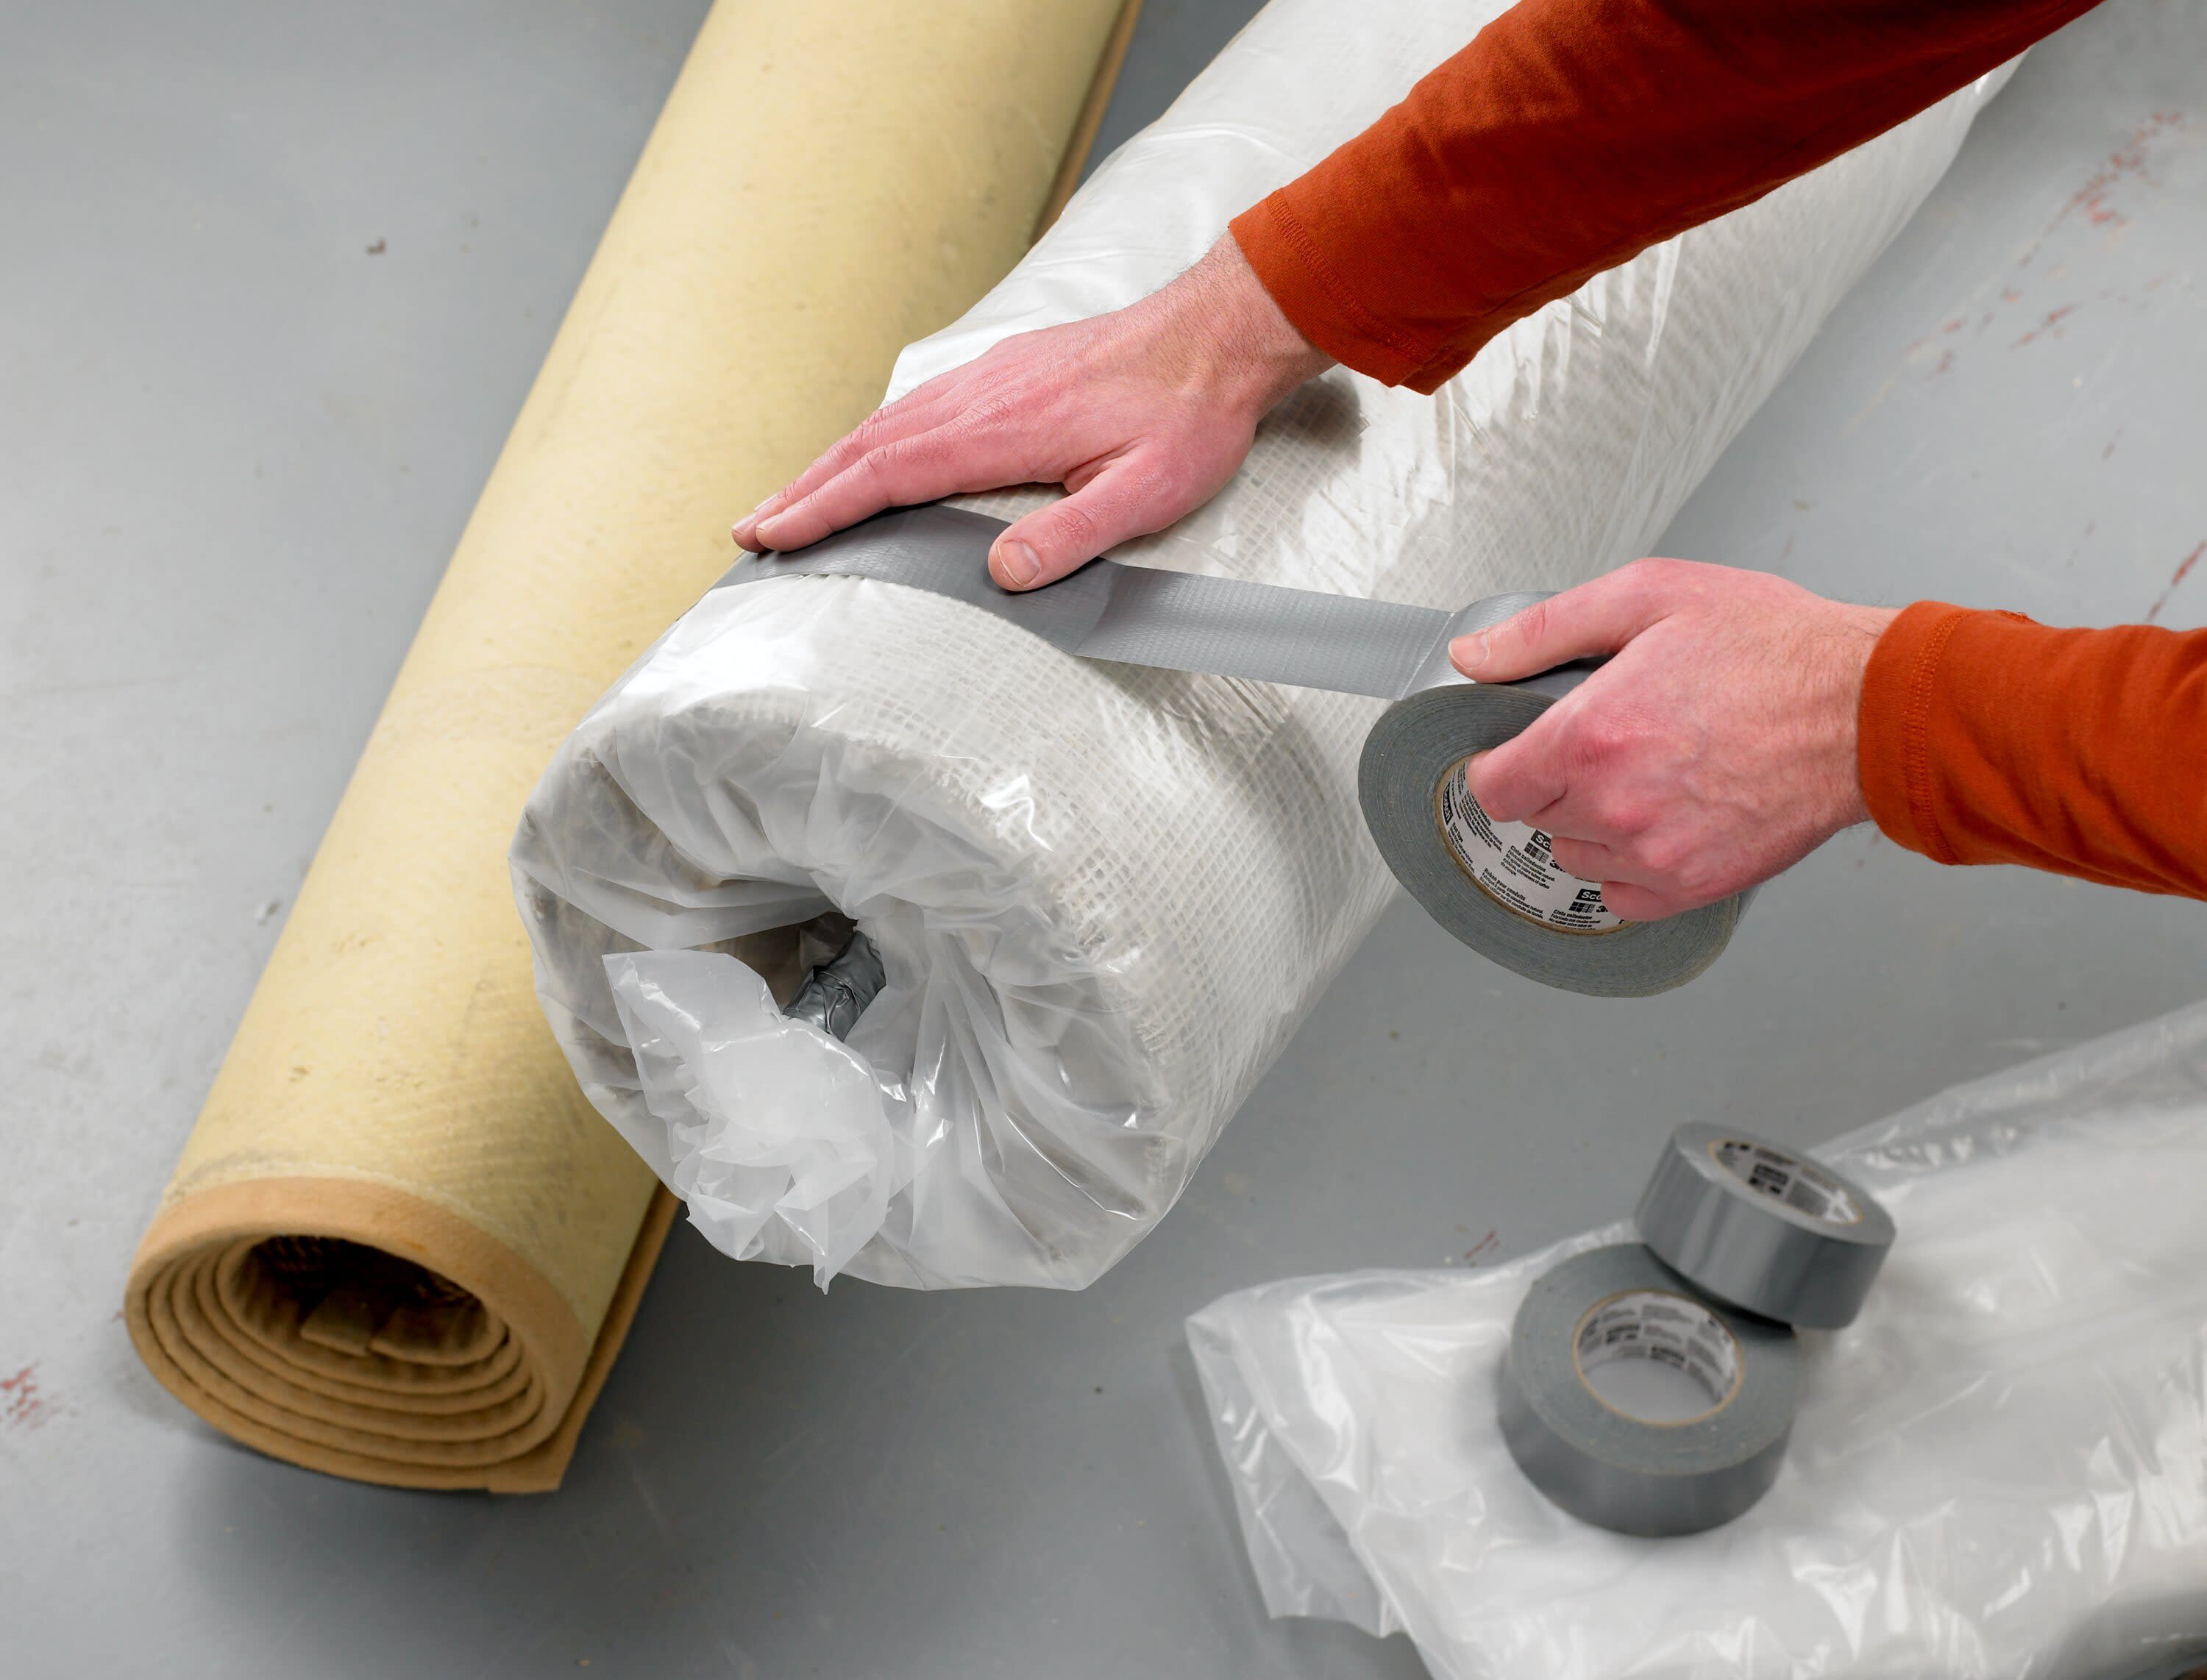 3 General Purpose Cloth Duct Tape by ToolLab